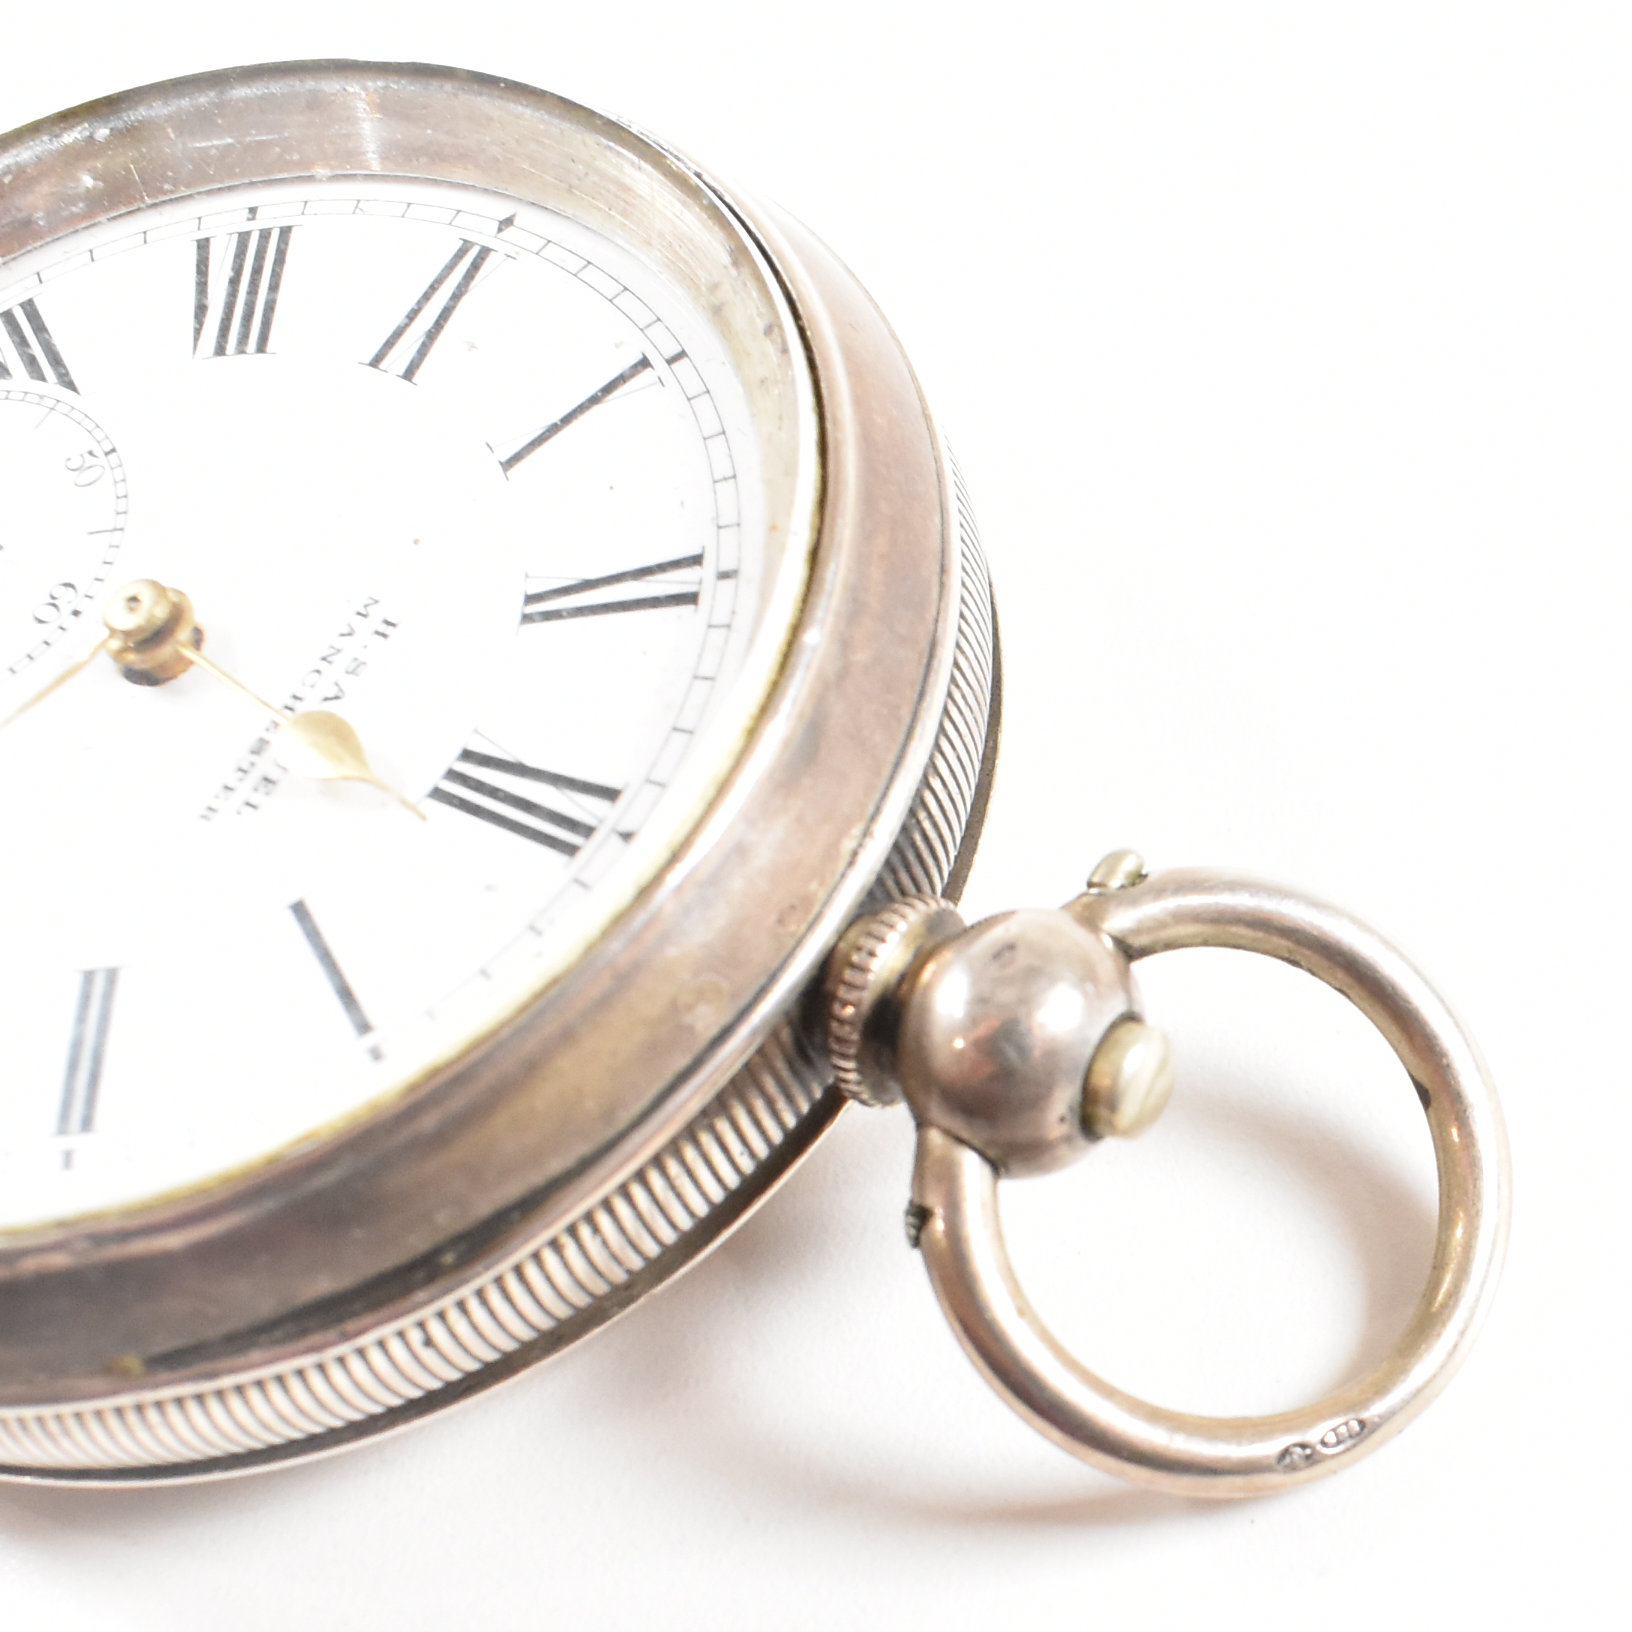 OPEN FACED SILVER 925 H SAMUEL POCKET WATCH - Image 8 of 8